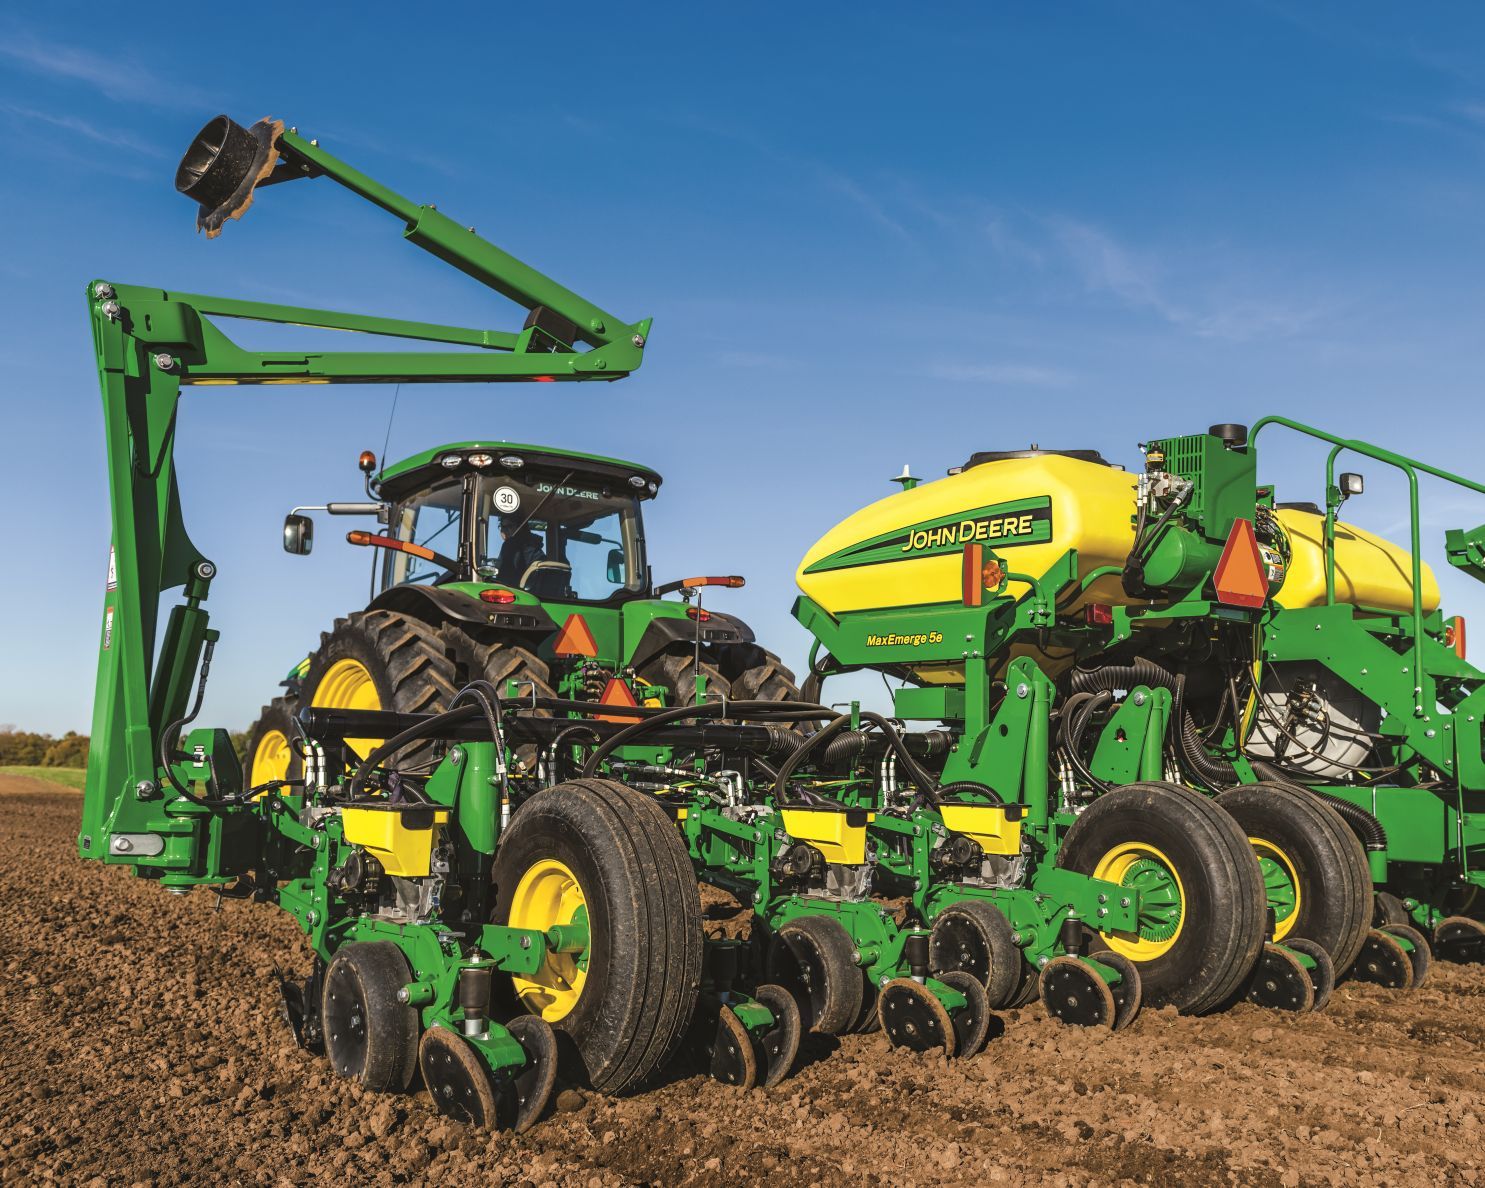 Close-up of a John Deere tractor and planter in an empty field.